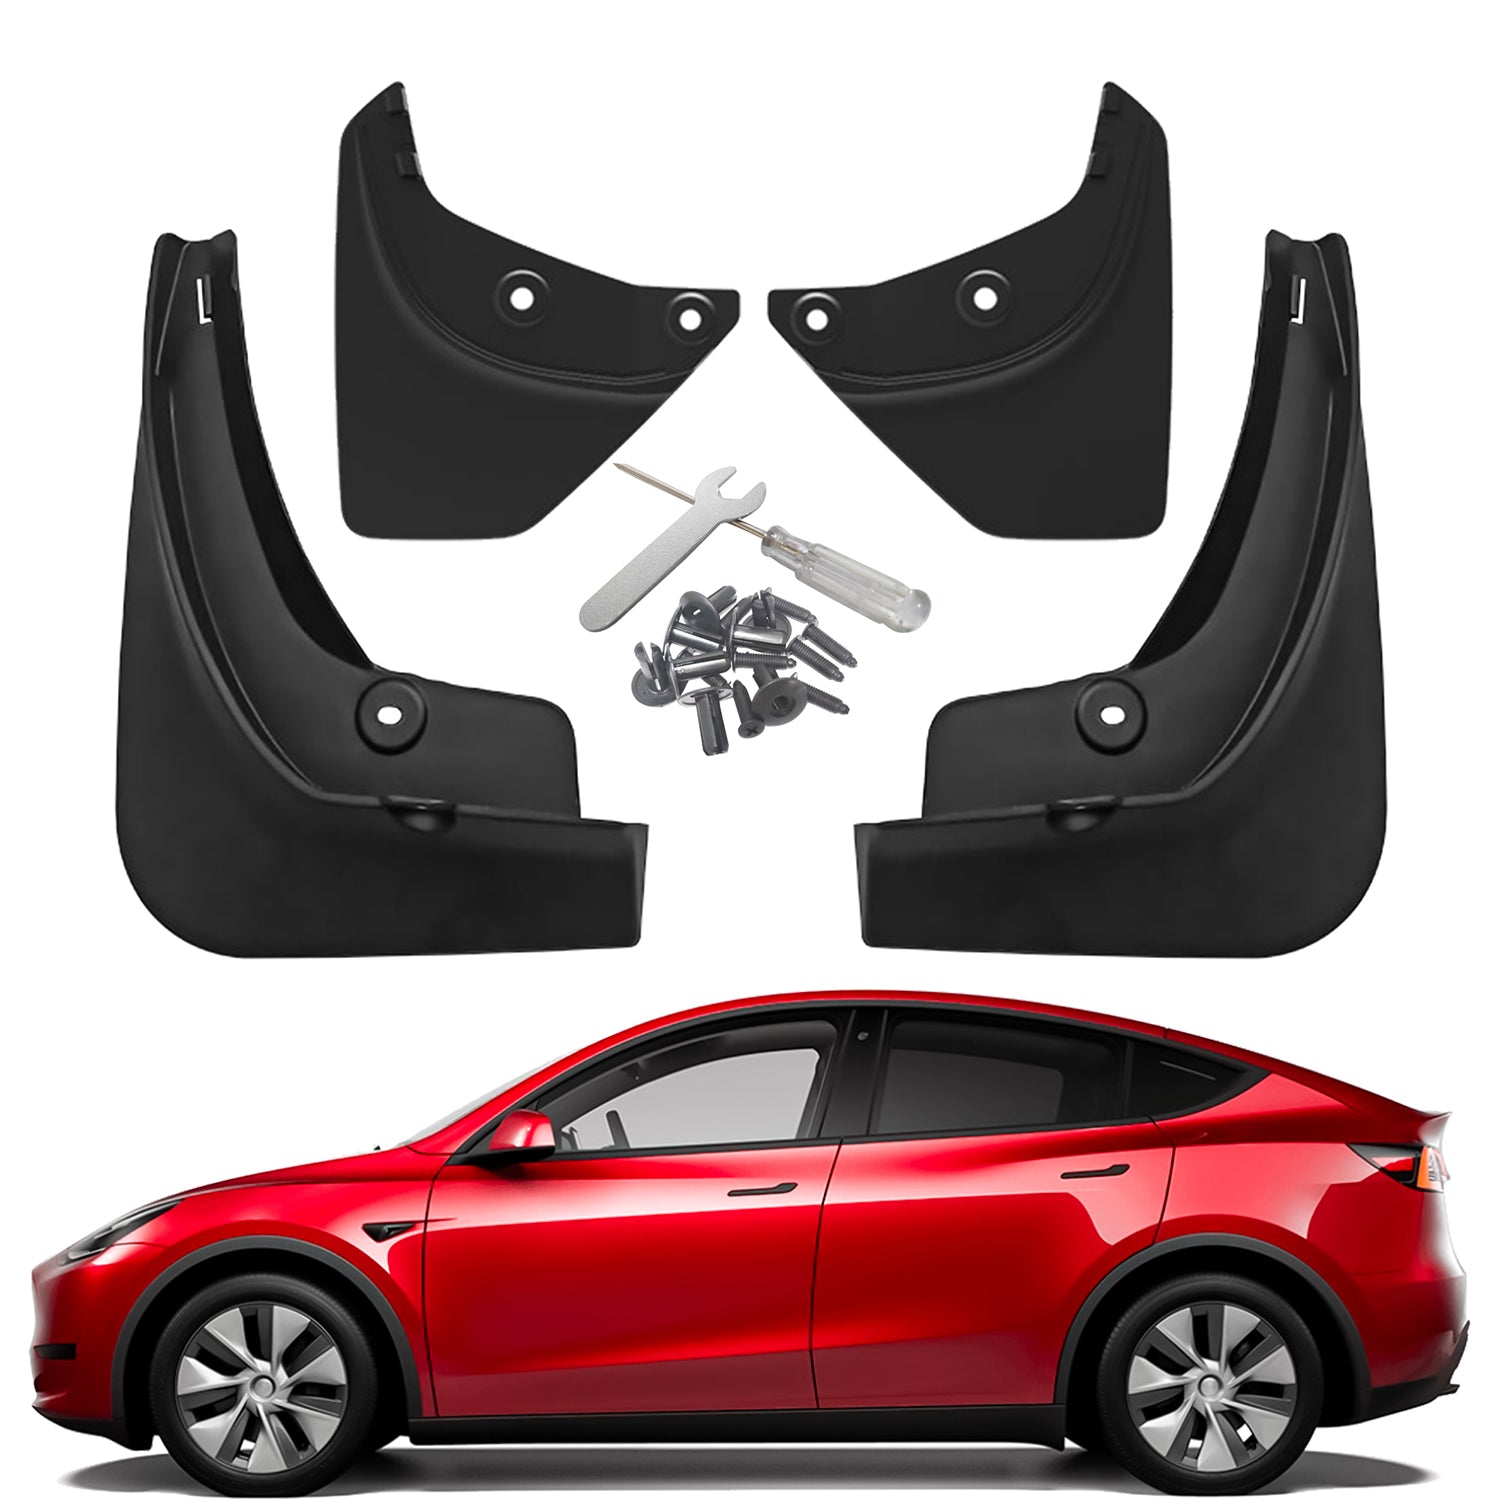 tesla model 3 car mud flaps protection flap splash guards fender fenders no drill drilling 2022 2023 2021 2020 2019 2018 s3xy arcoche accessories accessory aftermarket price Vehicles standard long range performance sr+ electric car rwd ev interior exterior diy decoration price elon musk must have black white red blue